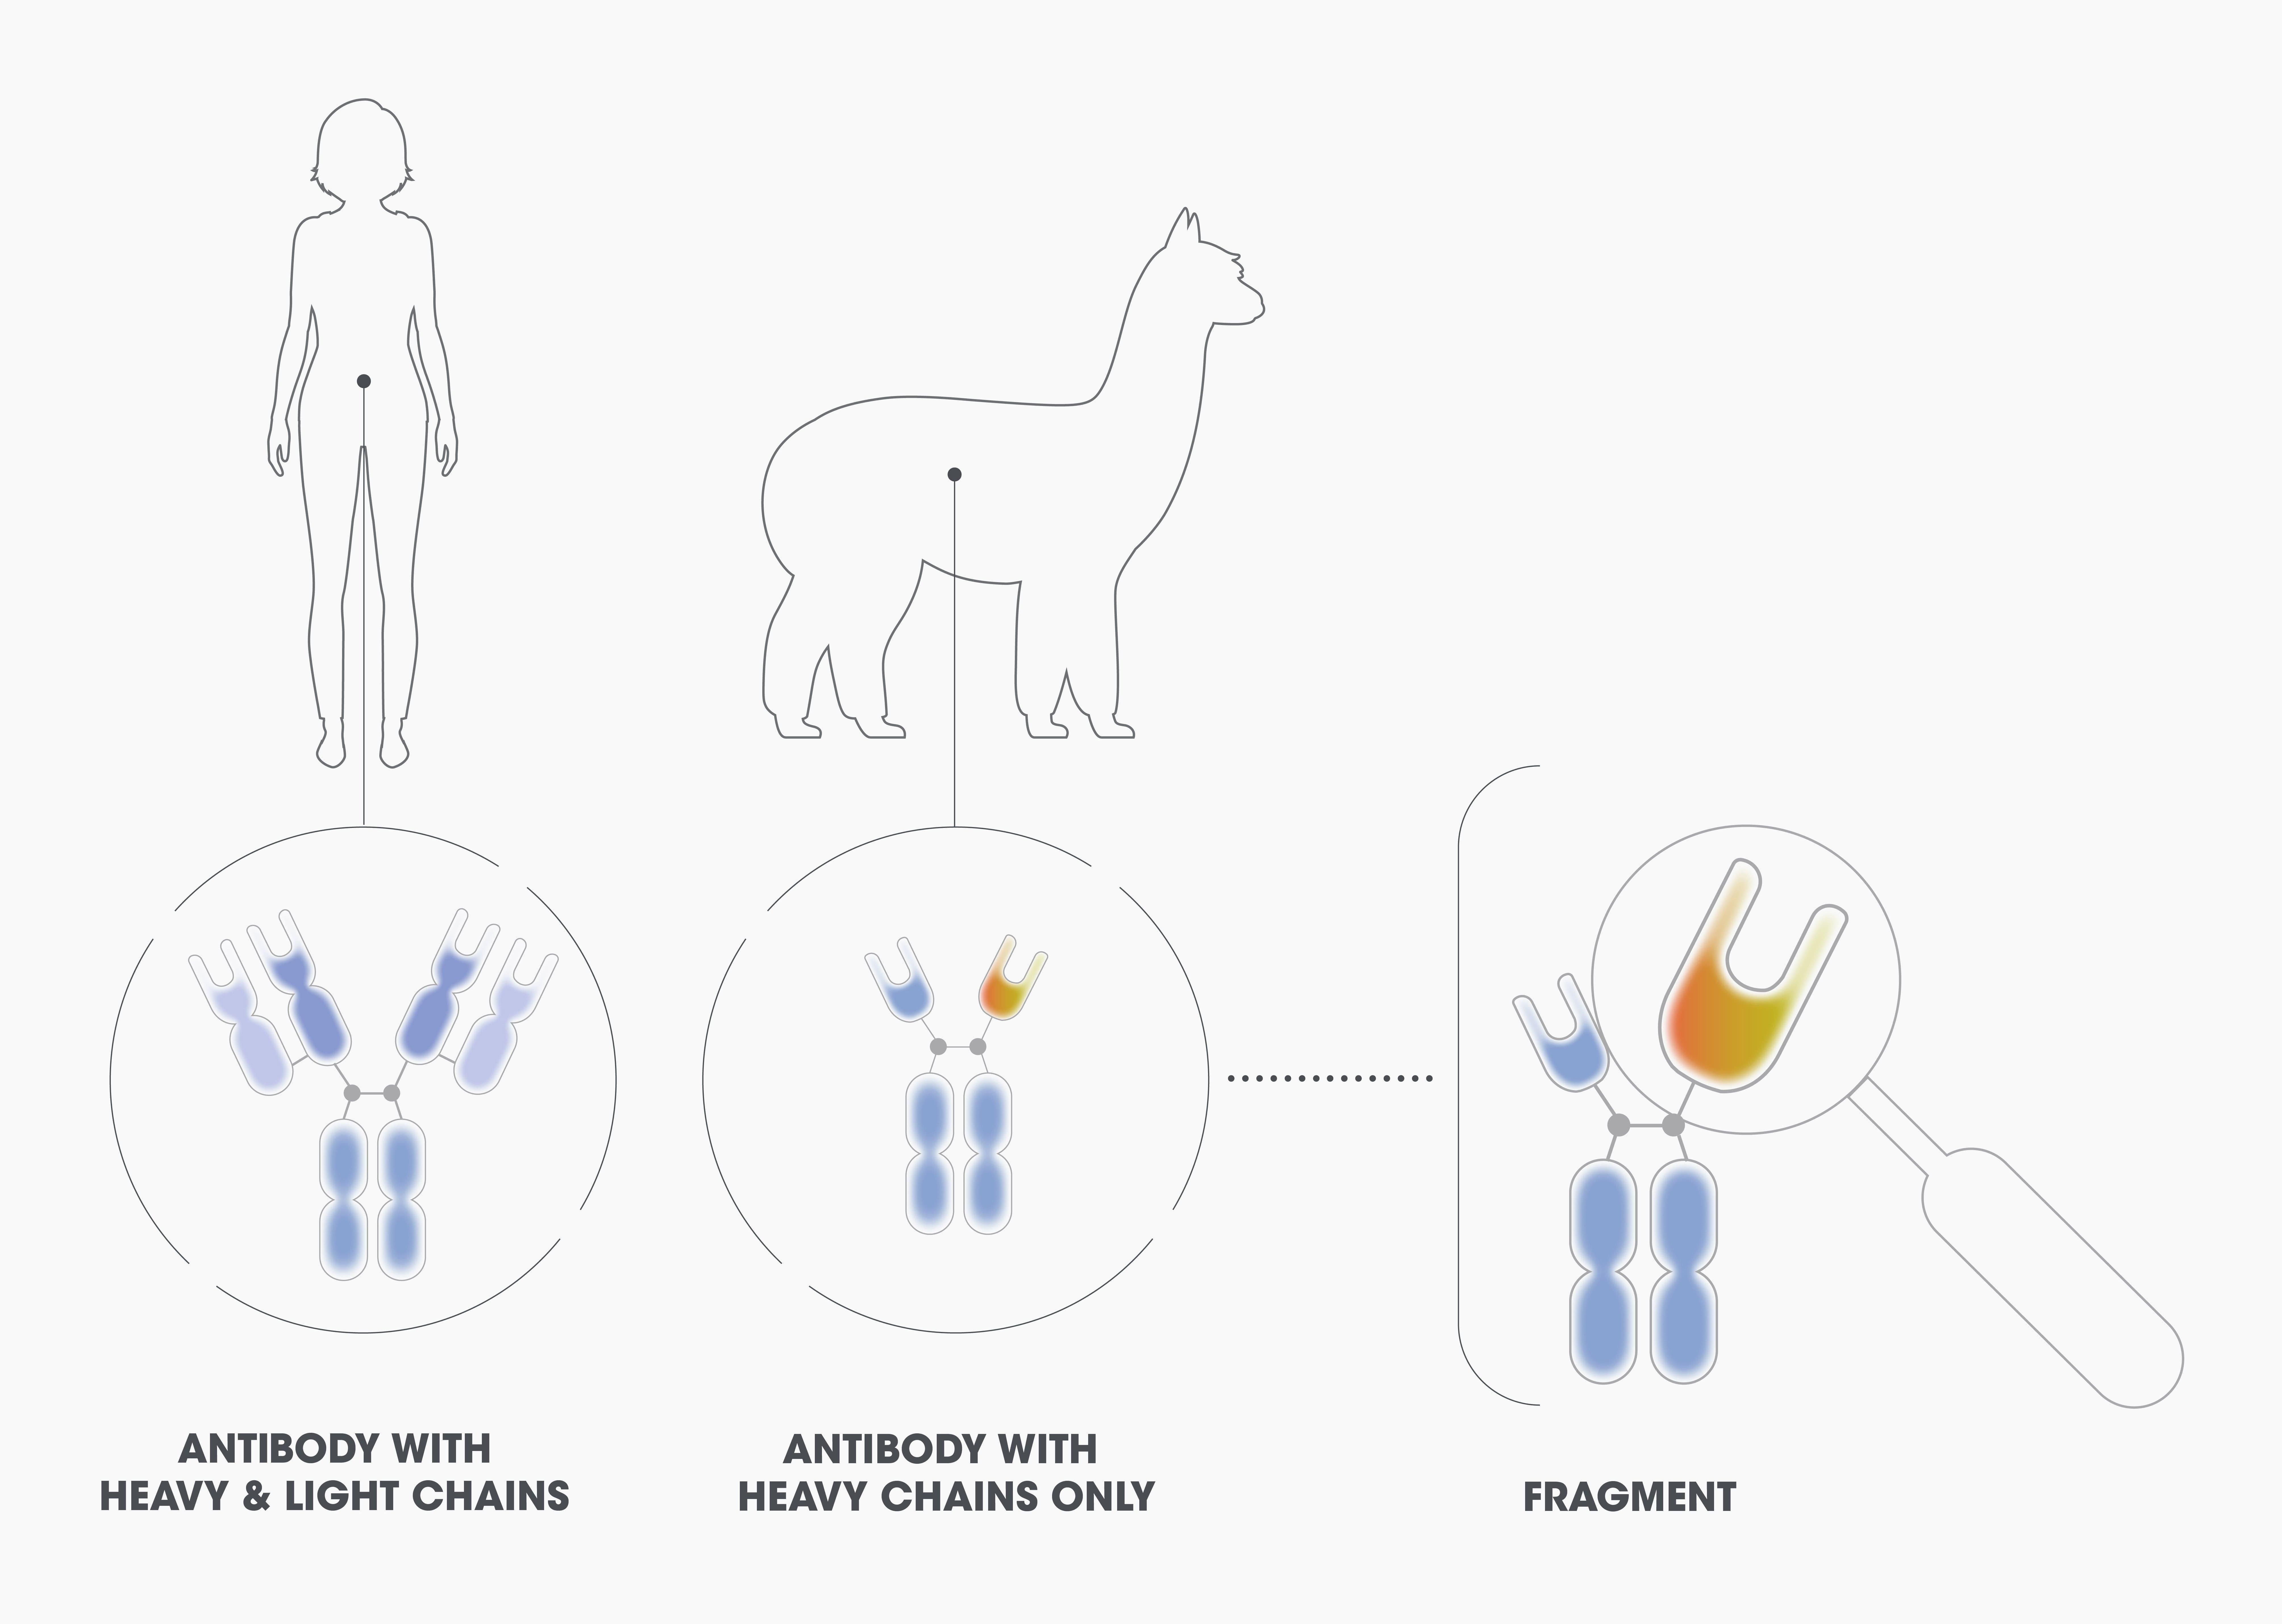 Human antibodies have both heavy and light peptide chains, (1) while camelids can also generate heavy-chain-only antibodies (2). NANOBODY® antibodies are based on a fragment of one domain of a heavy-chain antibody